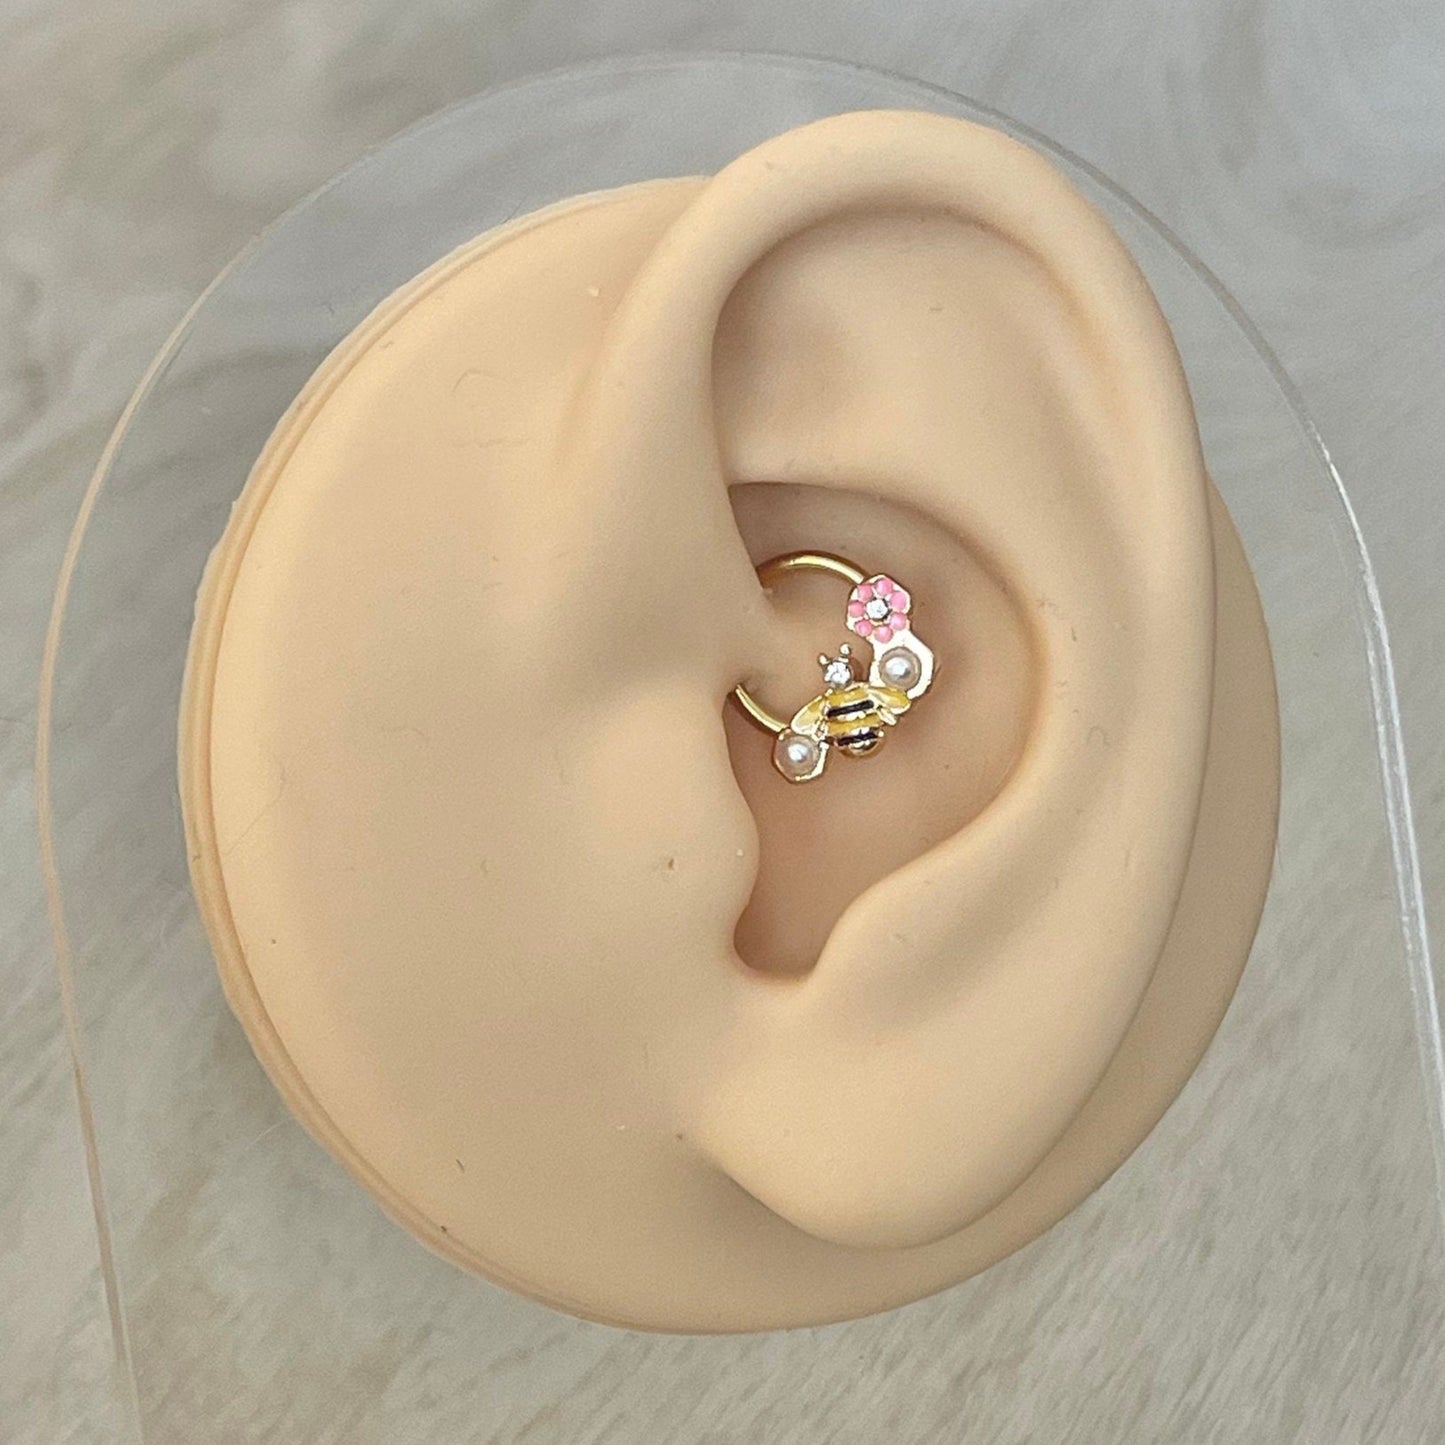 Bee Daith Earring (16G, 8mm or 10mm, Surgical Steel, Silver or Gold)